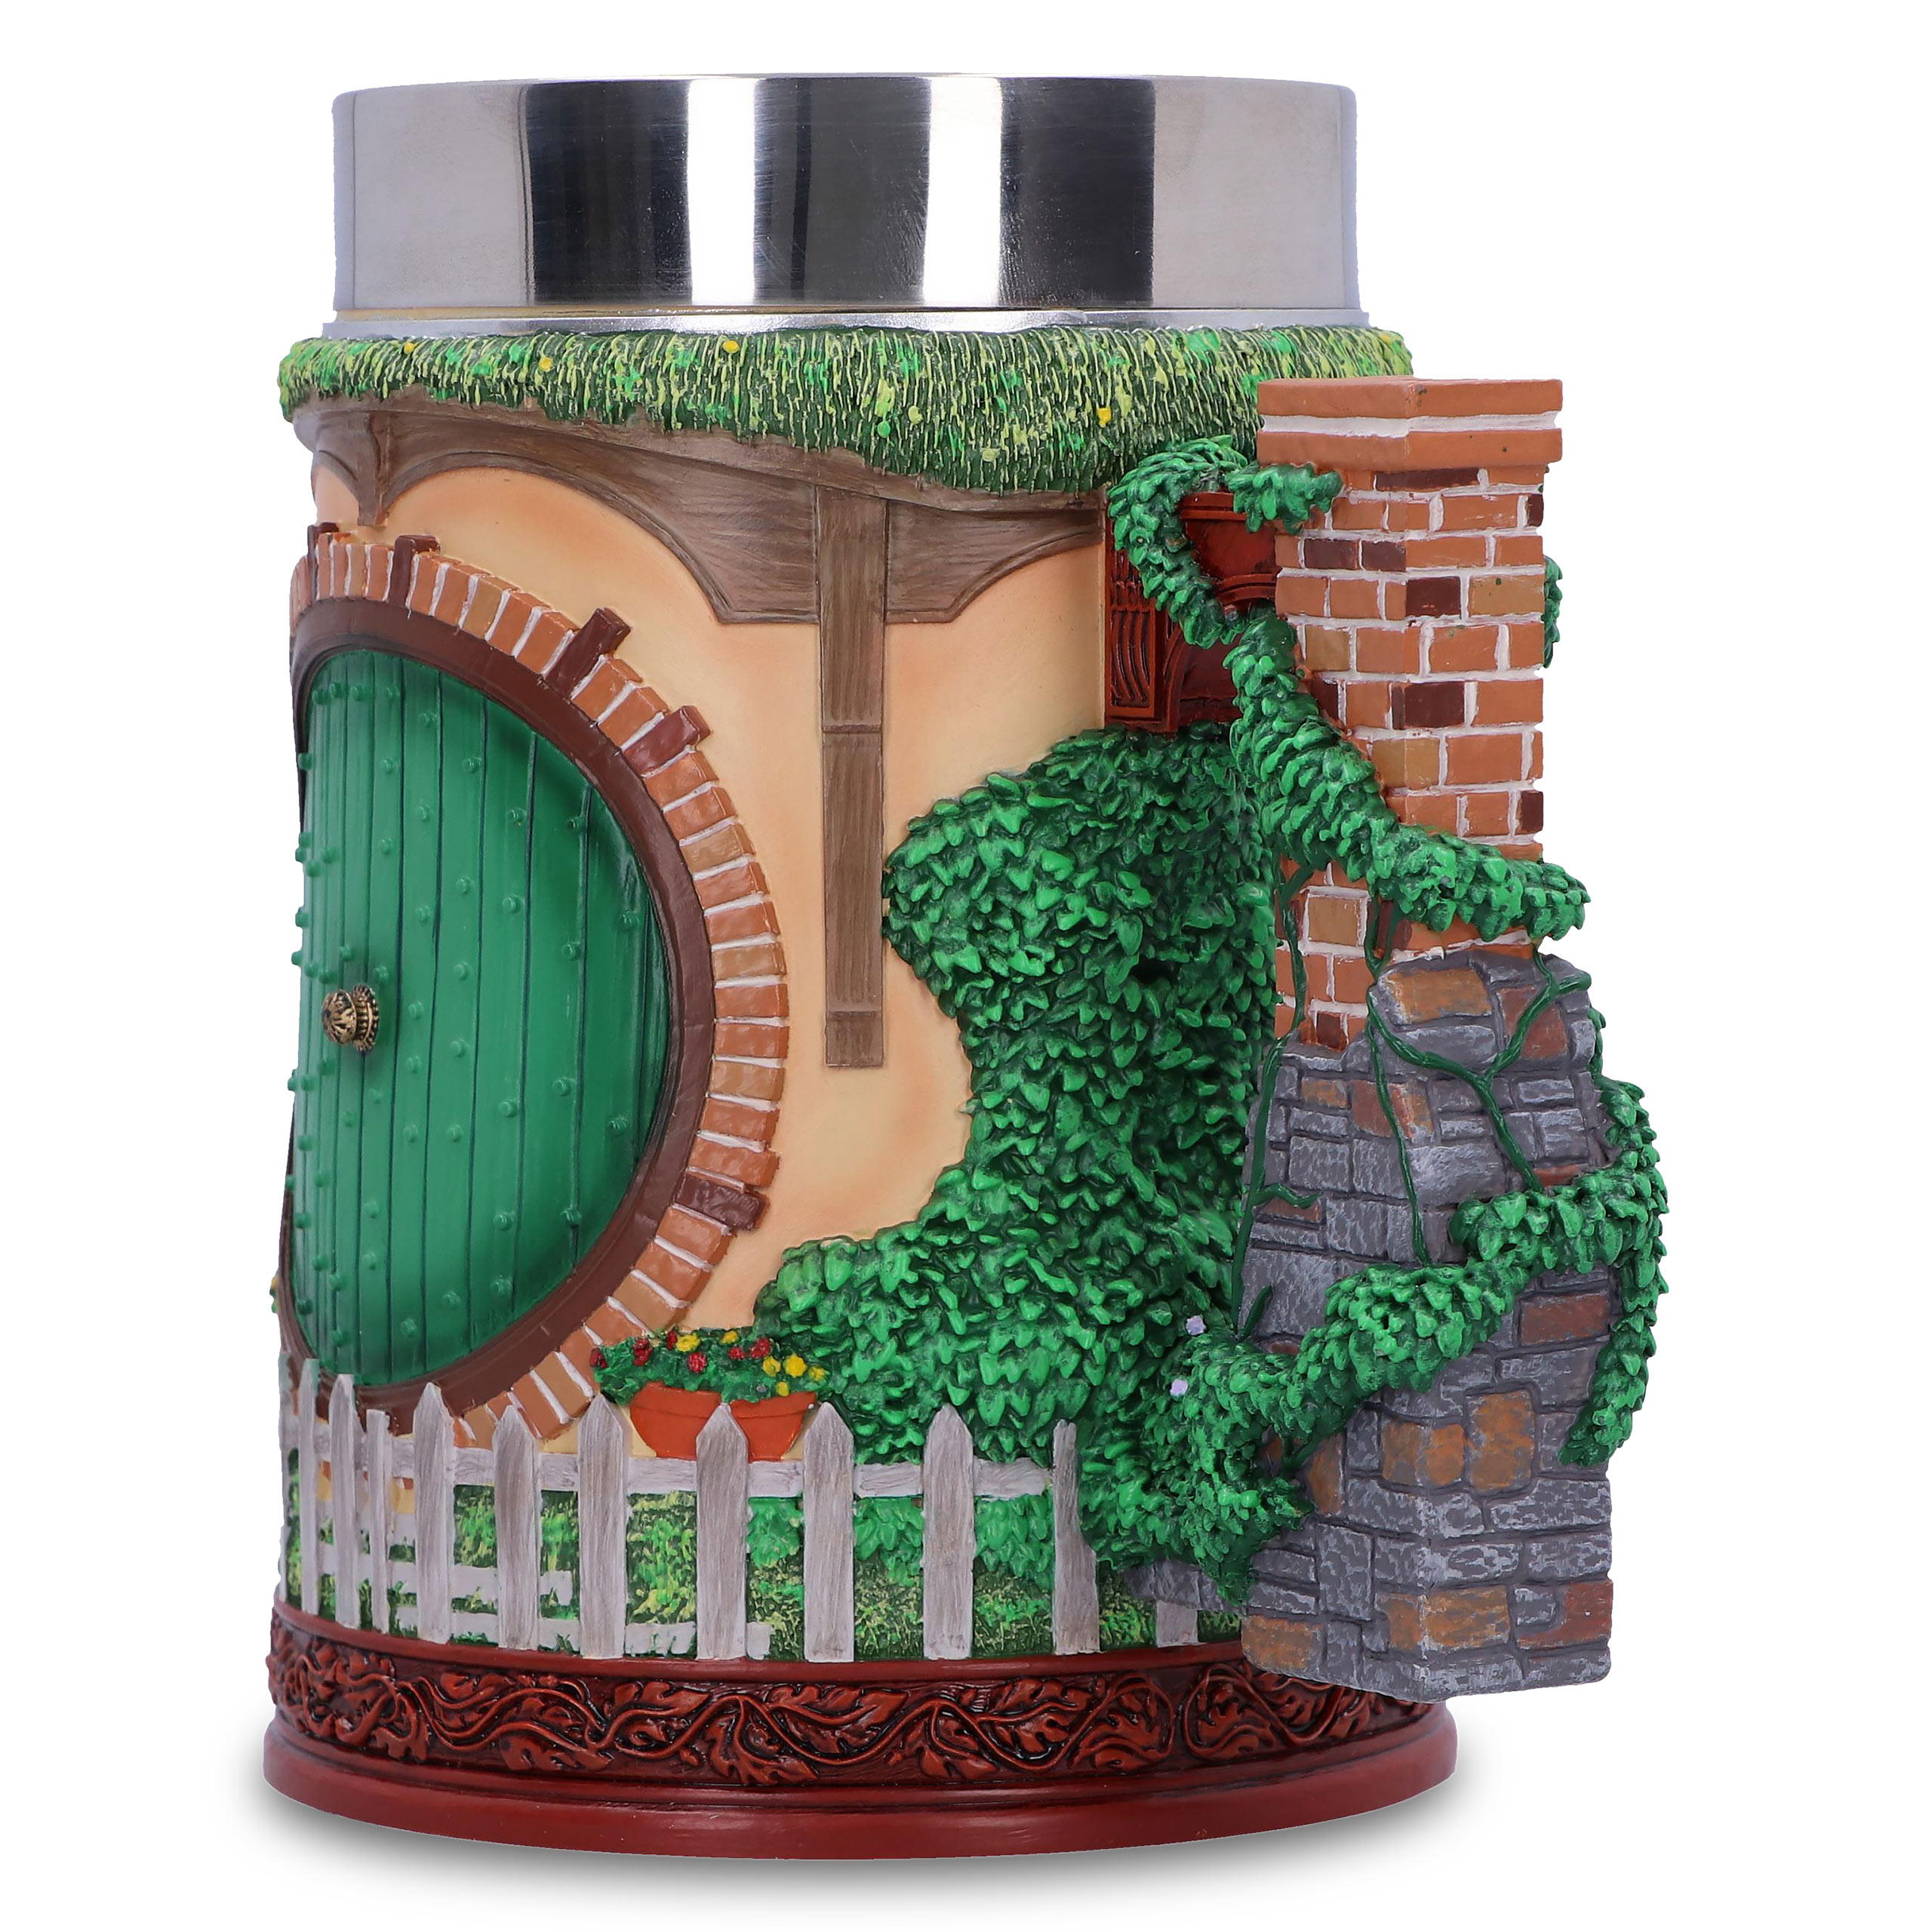 Lord of the Rings - Bag End Deluxe Mug